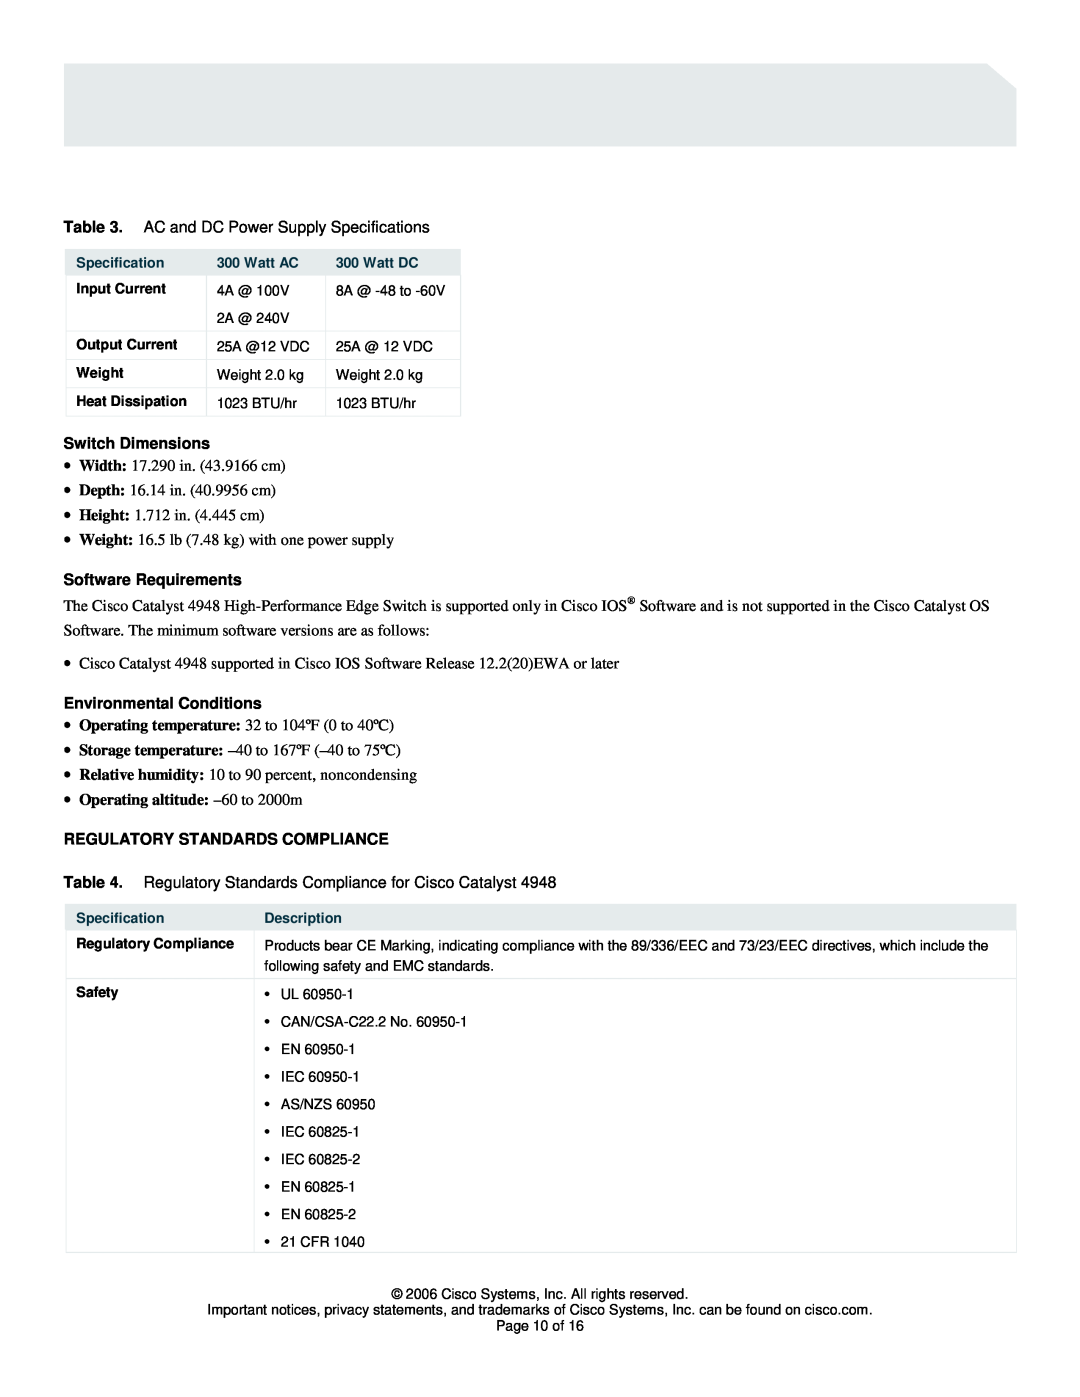 Cisco Systems 4948 Series manual Switch Dimensions, Software Requirements, Environmental Conditions 